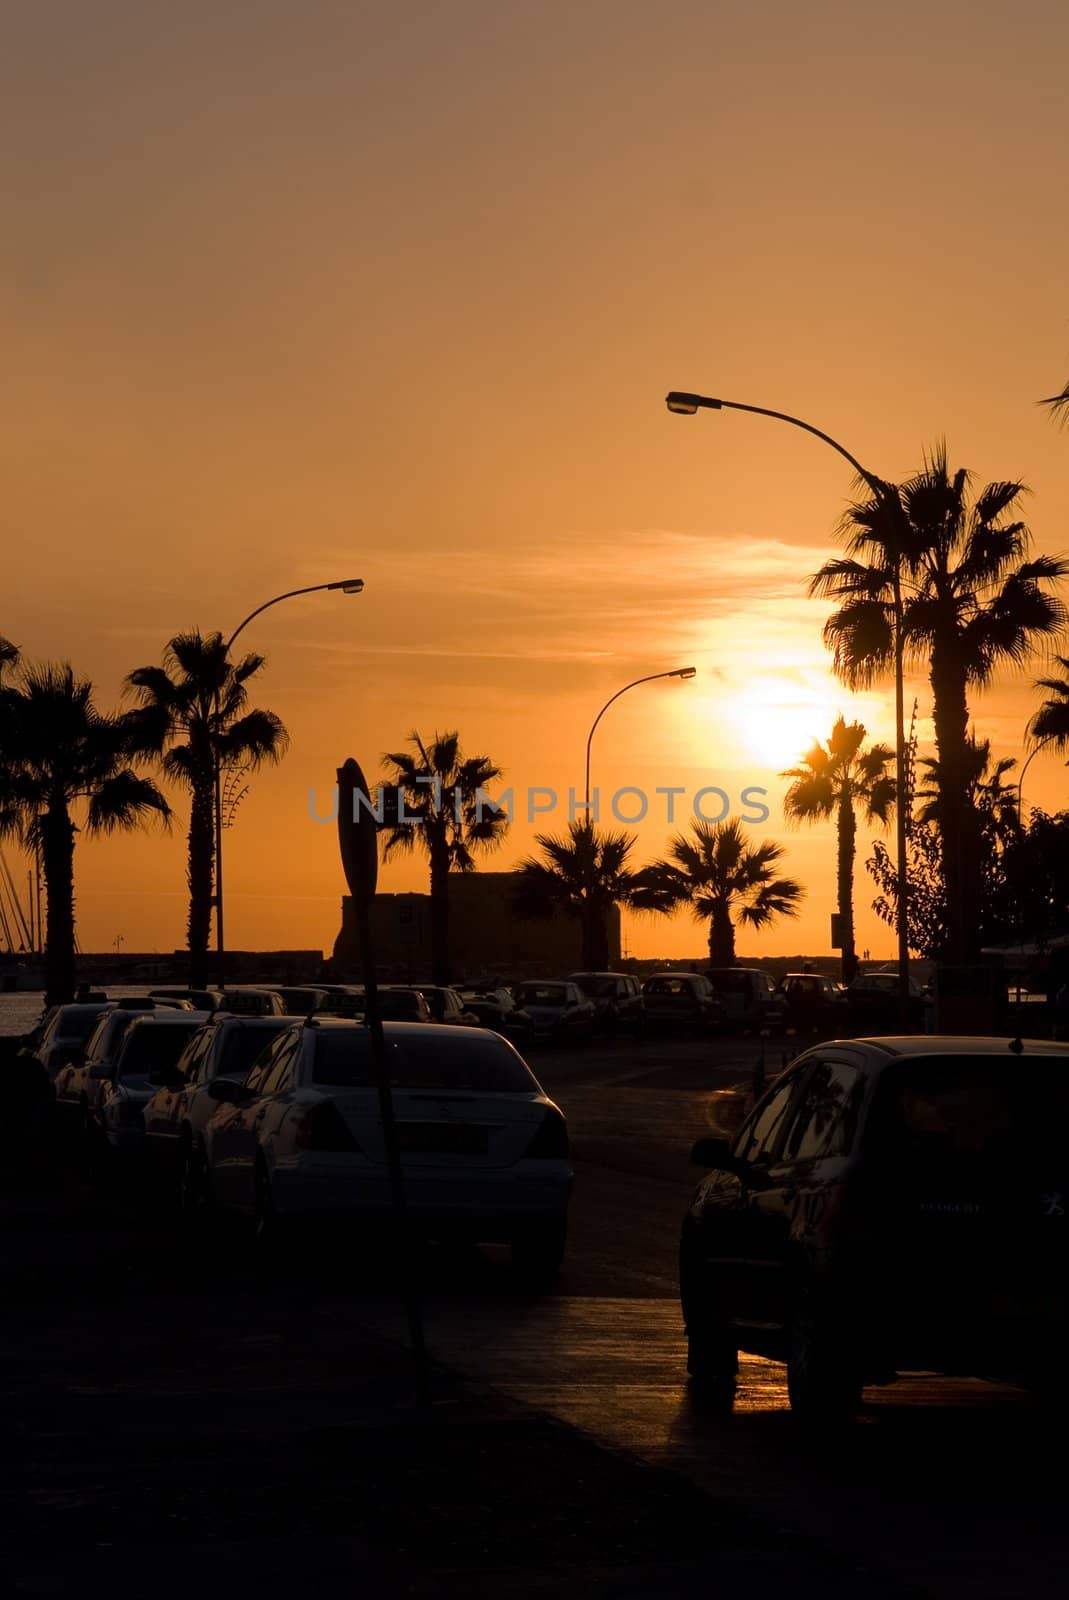 Yellow sunset with cars and palms by lilsla